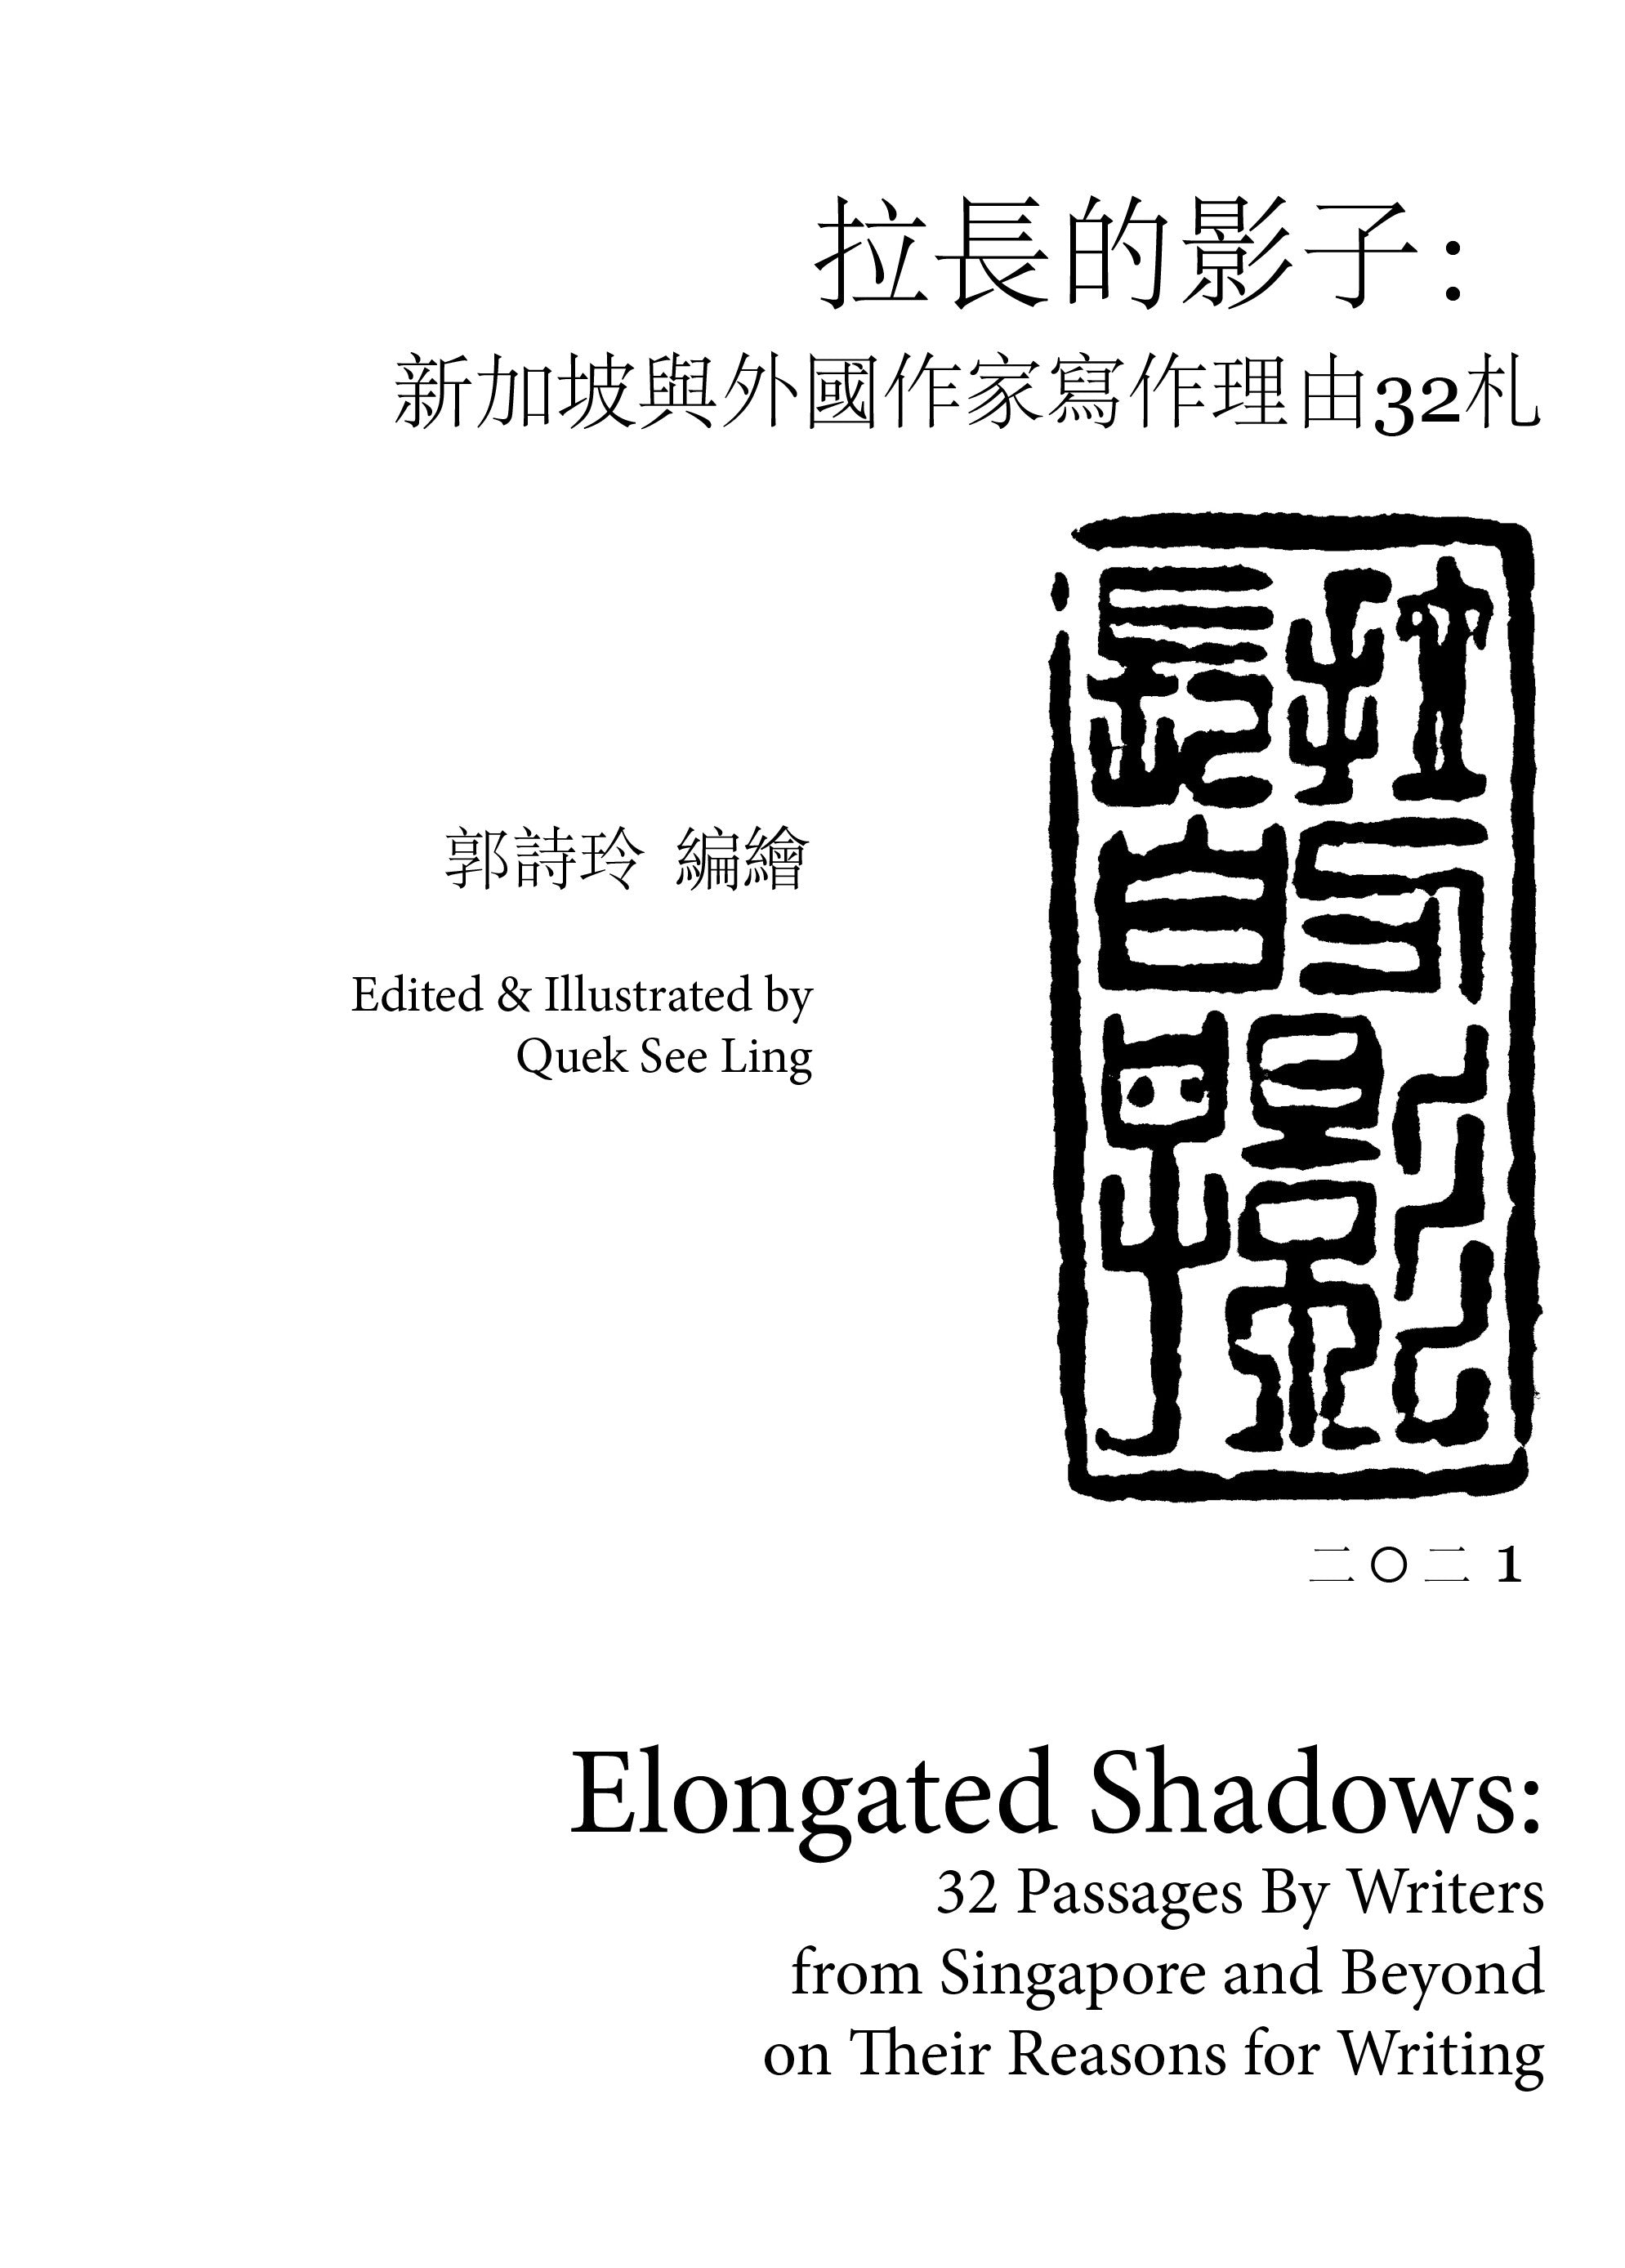 Elongated Shadows: 32 Passages By Writers from Singapore and Beyond on Their Reasons for Writing